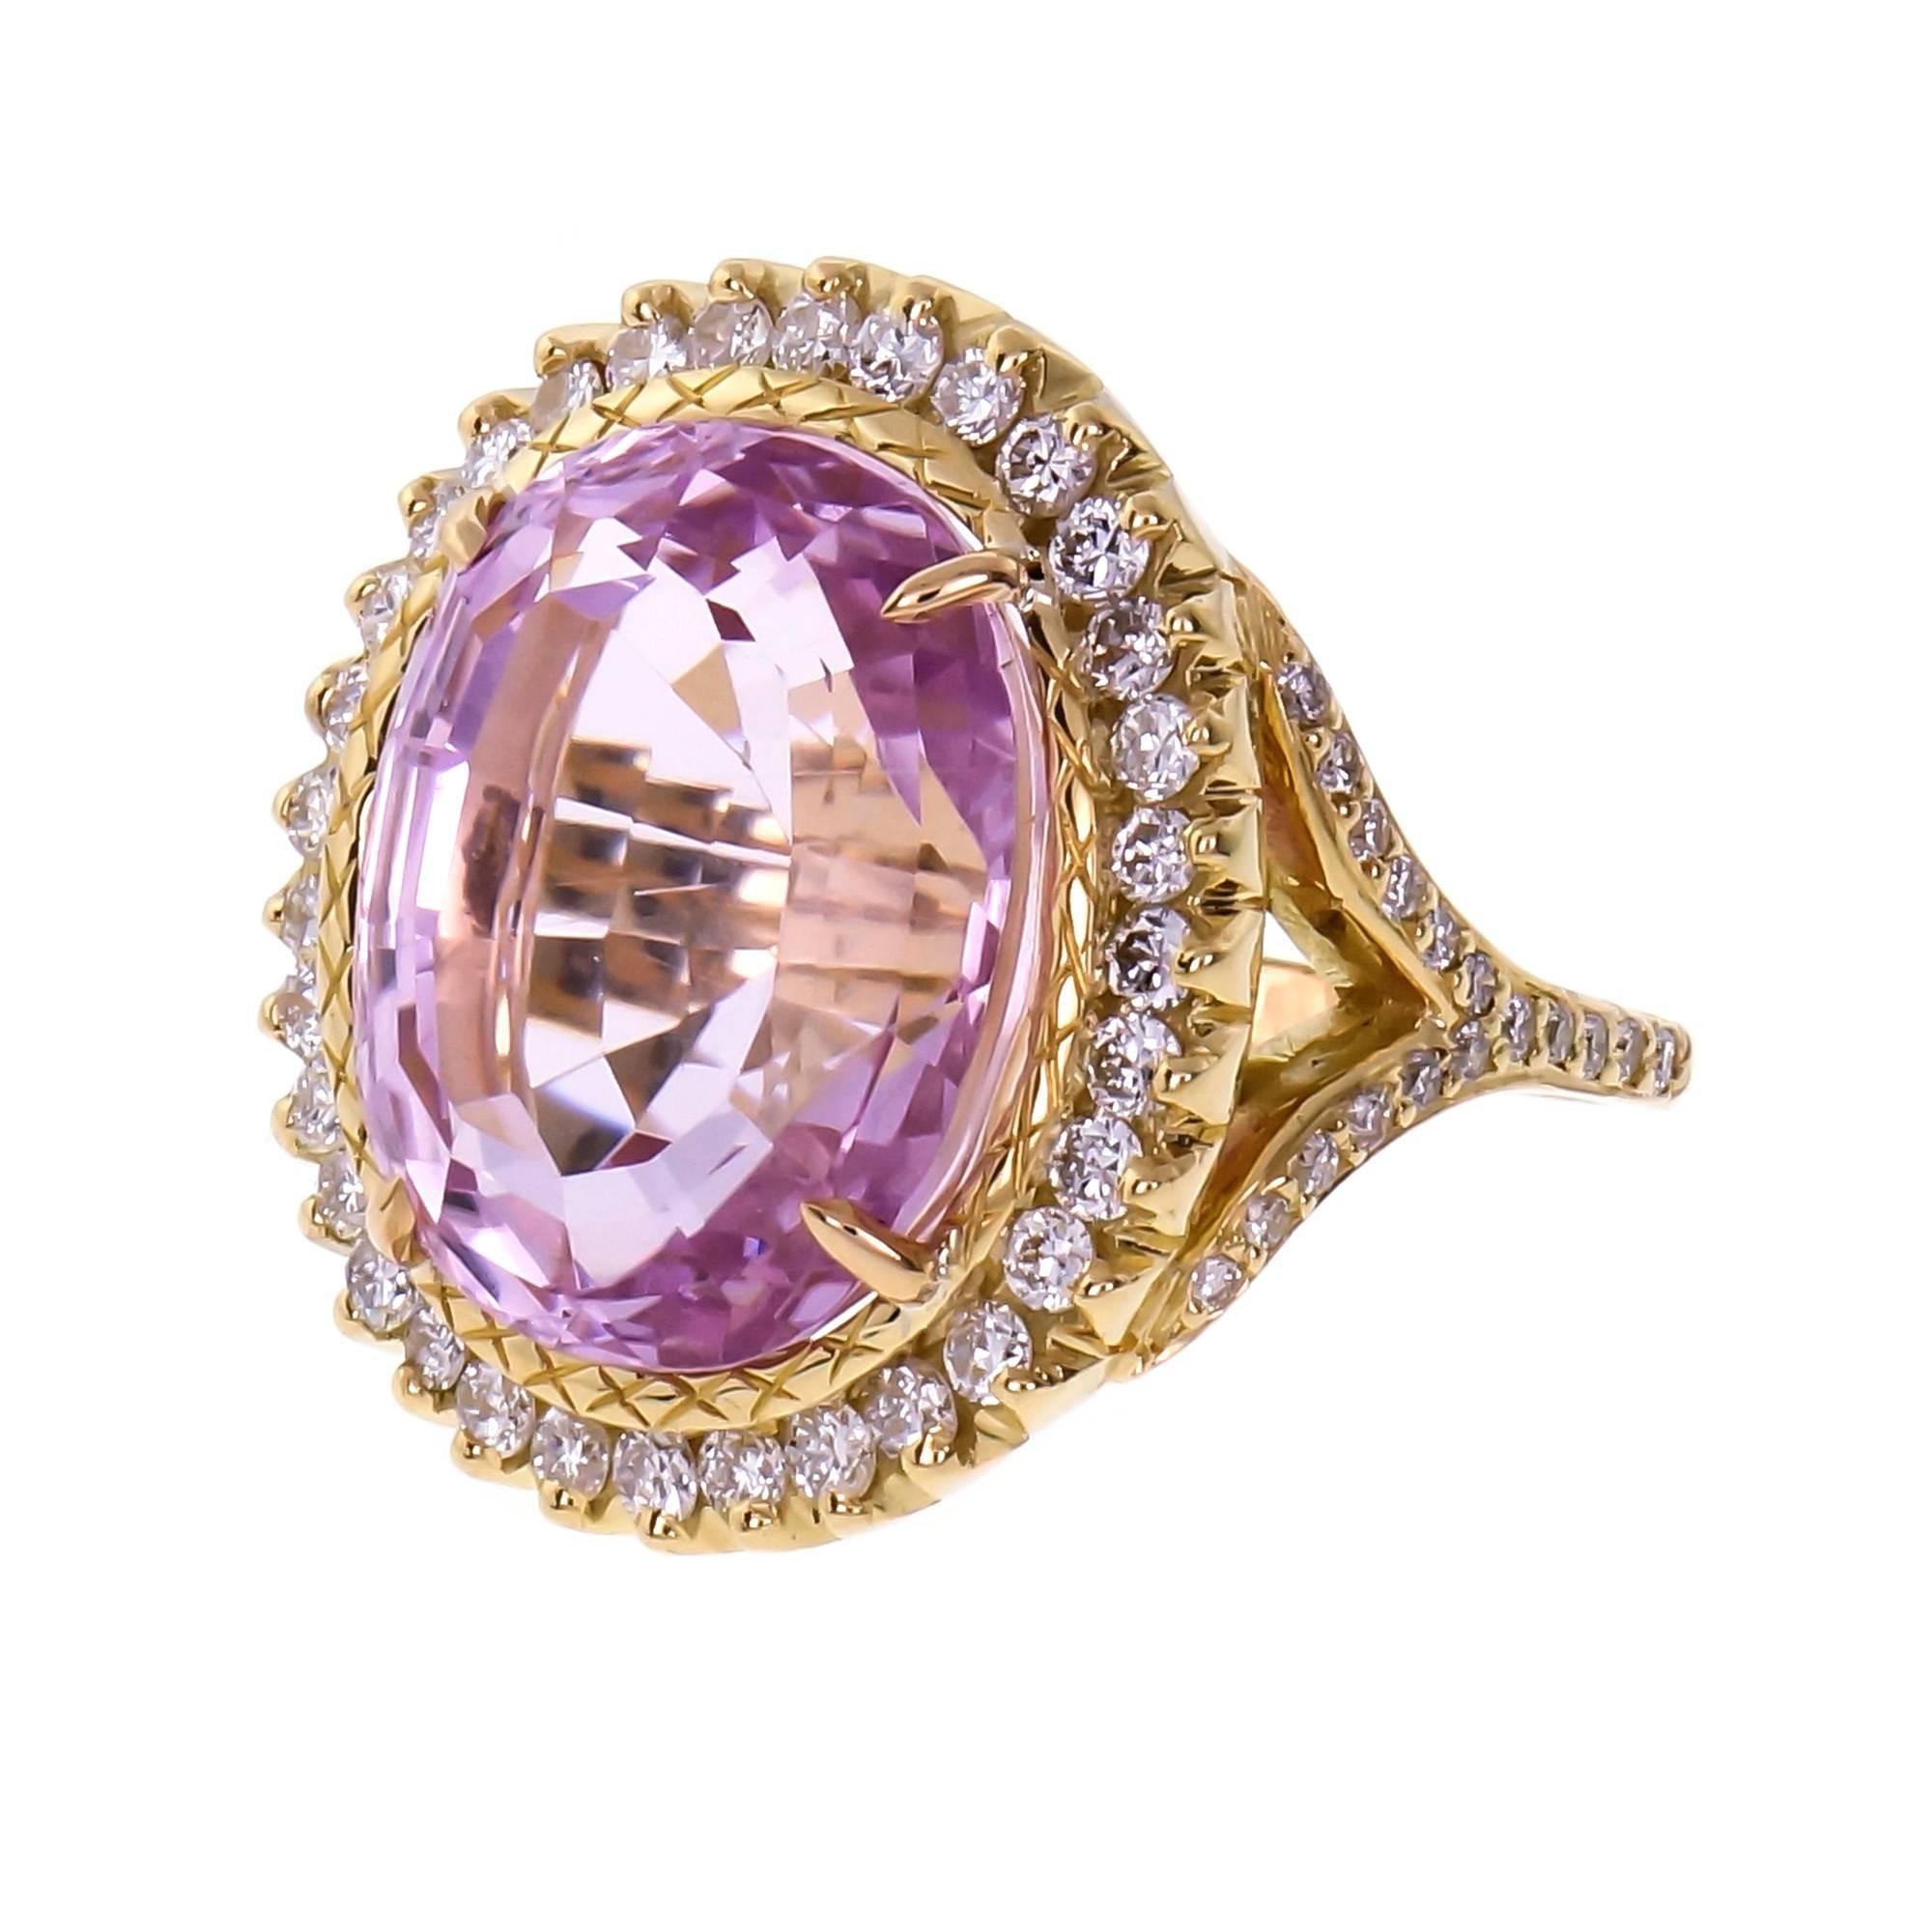 Bright pink oval Kunzite and diamond halo cocktail ring.  19.30cts oval step cut Kunzite in a custom made 18k yellow gold halo ring with a Diamond split shank. Sparkly round brilliant cut Diamonds. Hallmark we cannot make out. 

1 oval bright pink